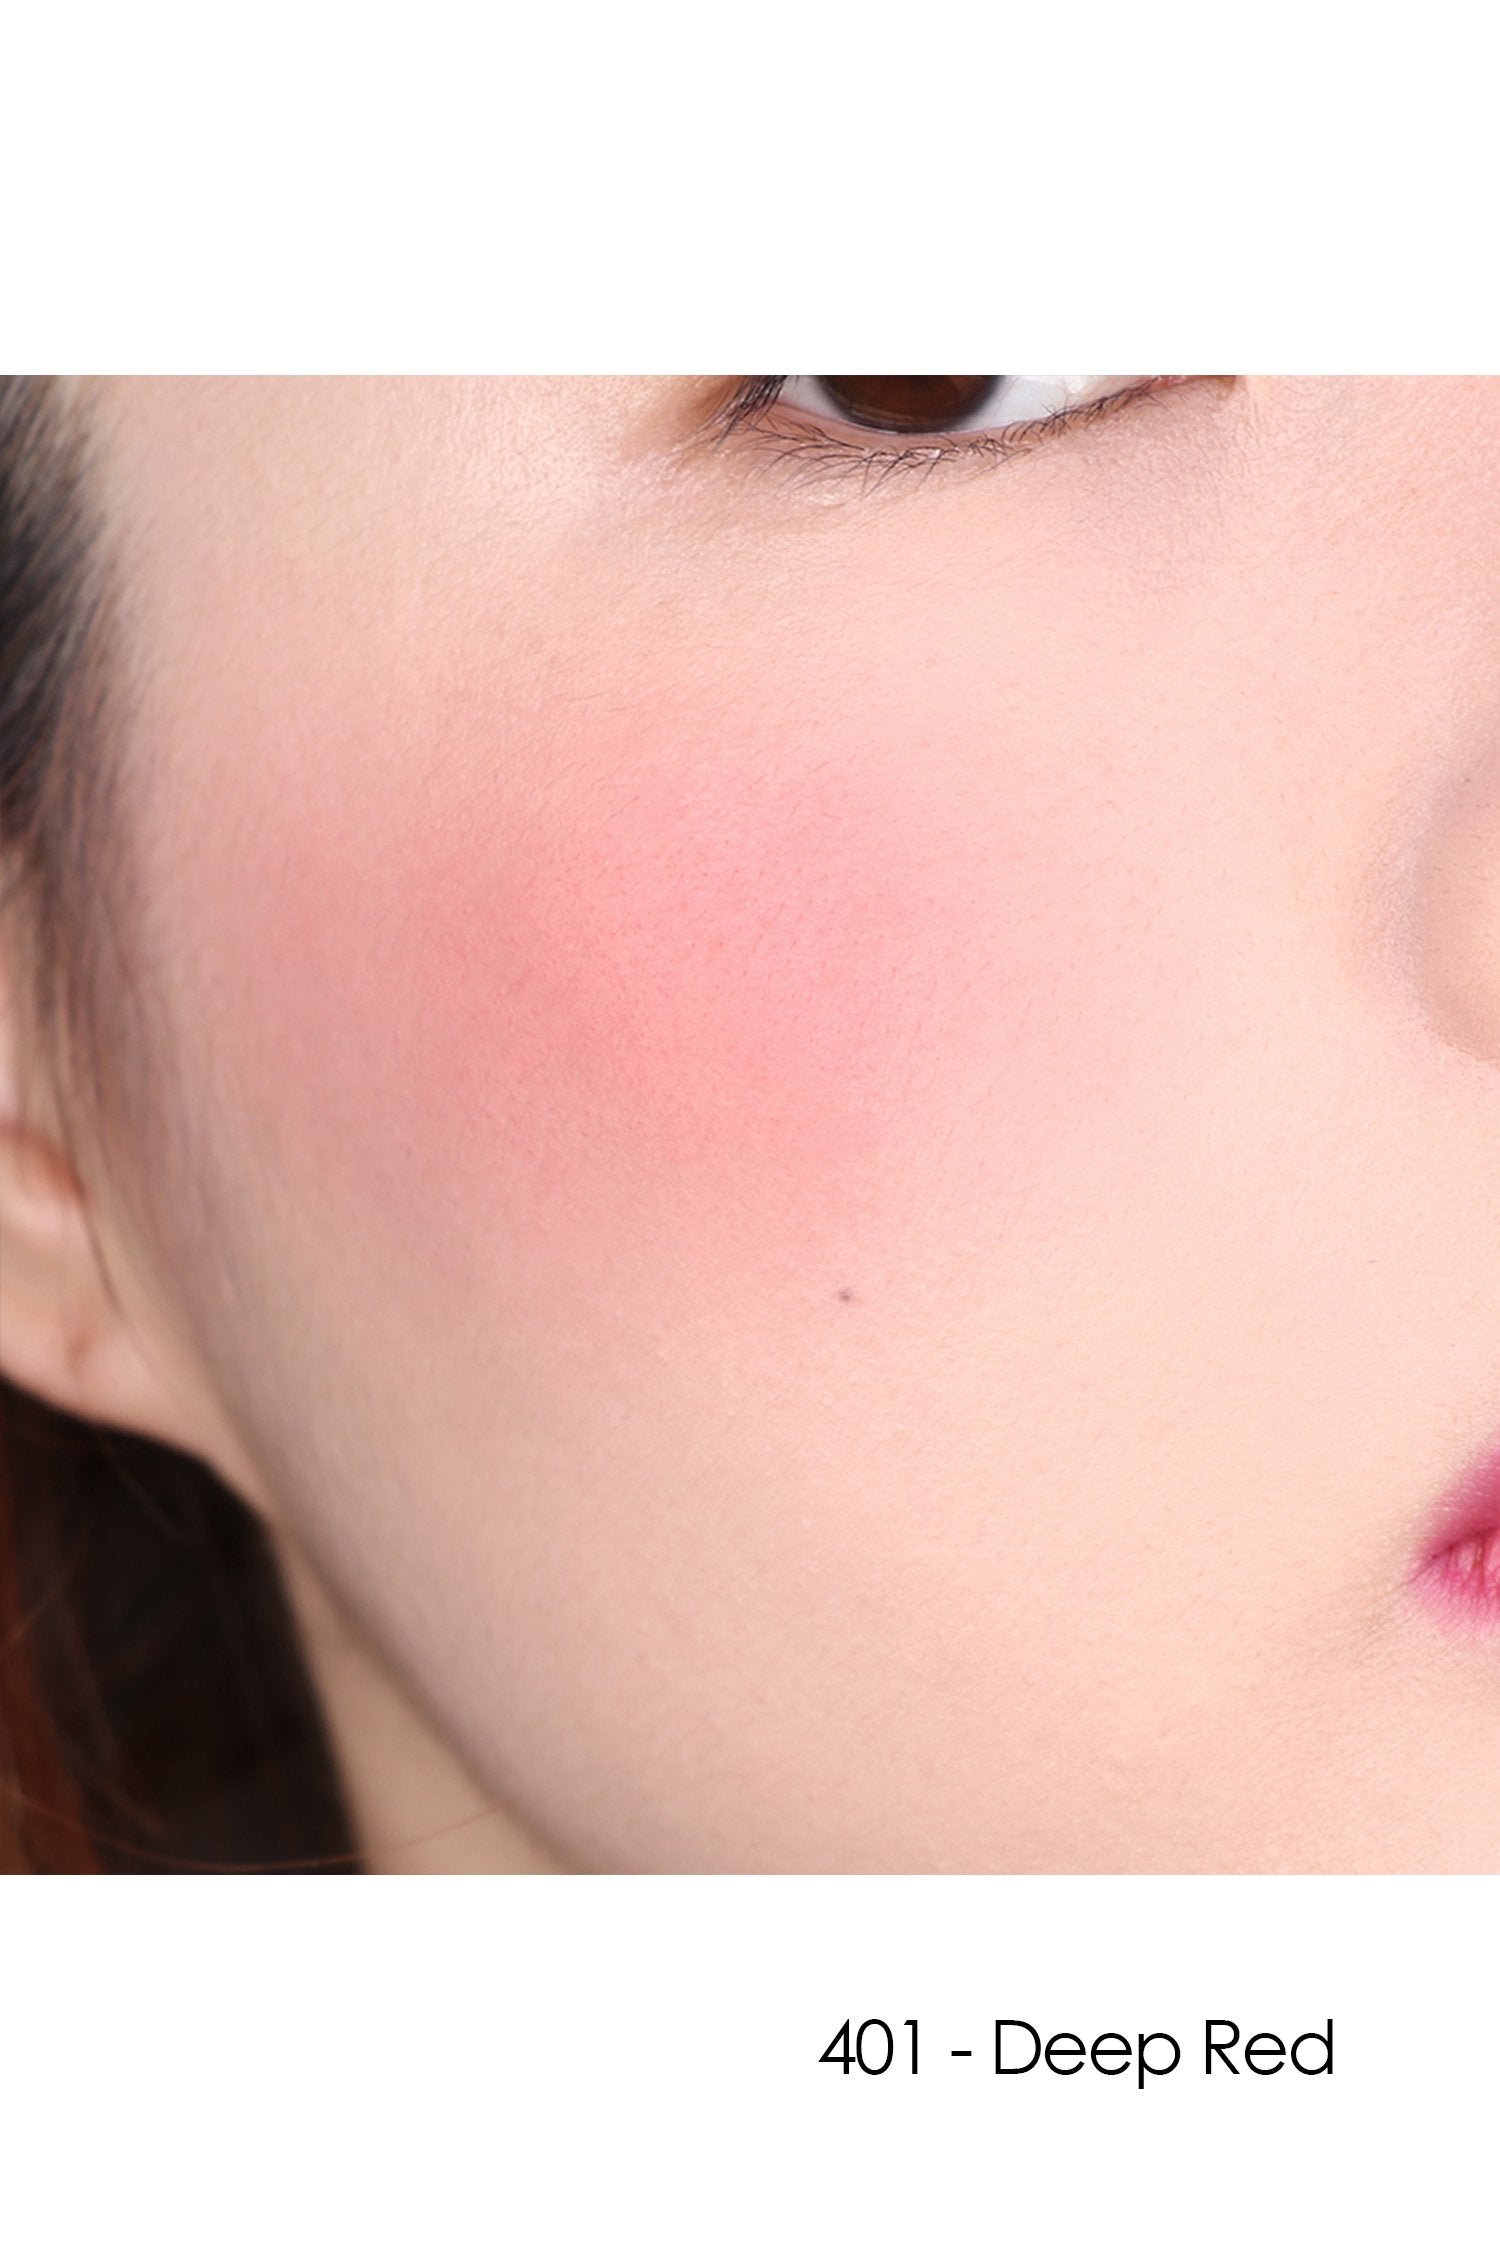 401 - Deep Red of this powder spreads on the cheeks and clings tightly on the skin.